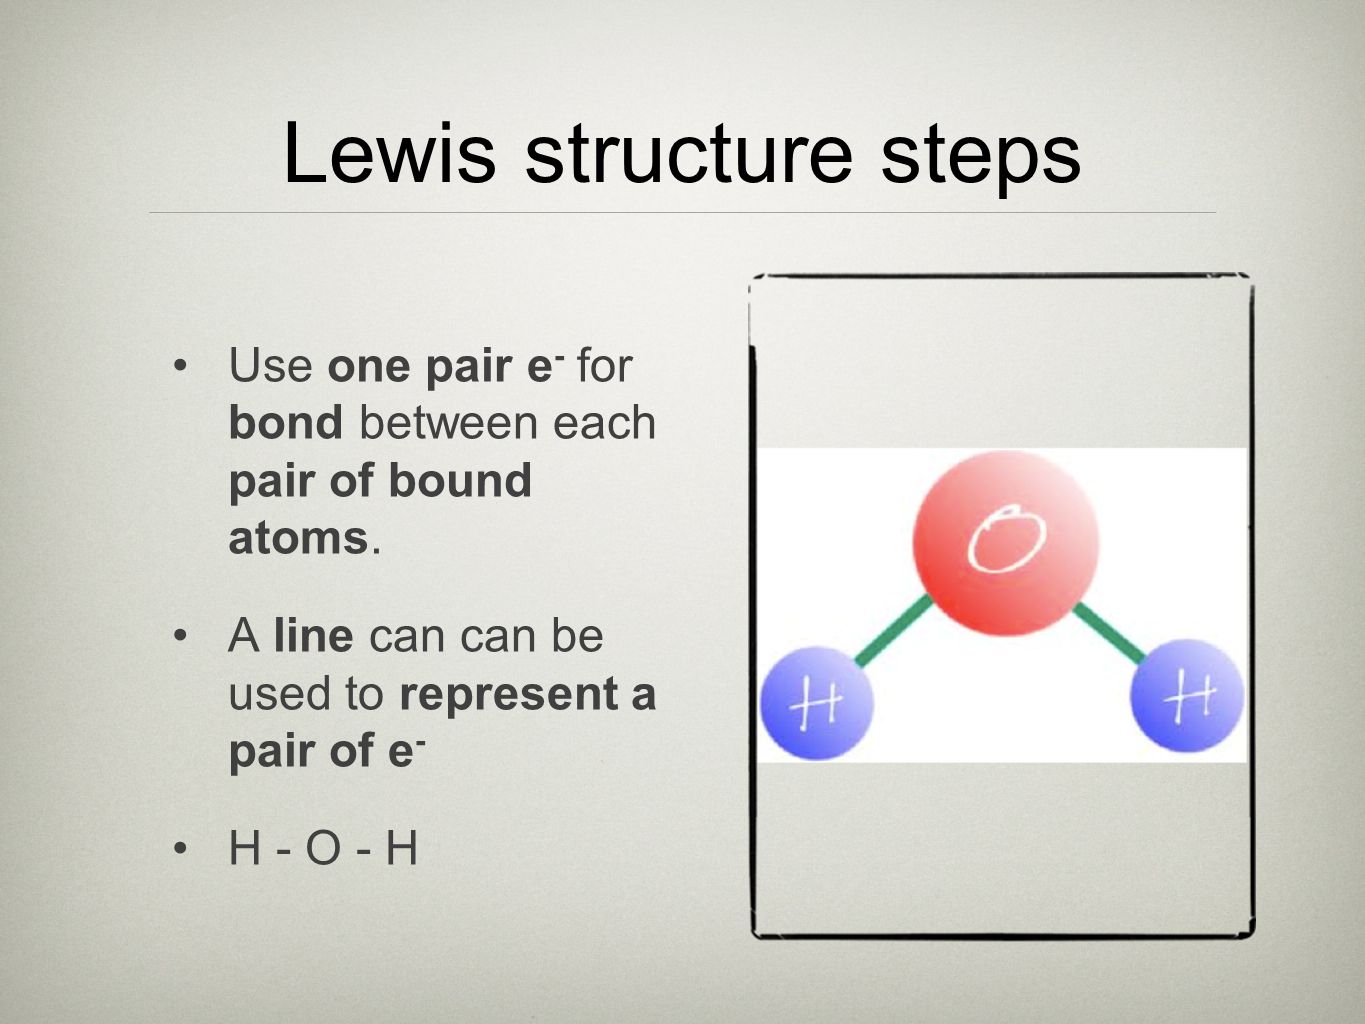 Lewis structure steps Use one pair e- for bond between each pair of bound atoms. A line can can be used to represent a pair of e-